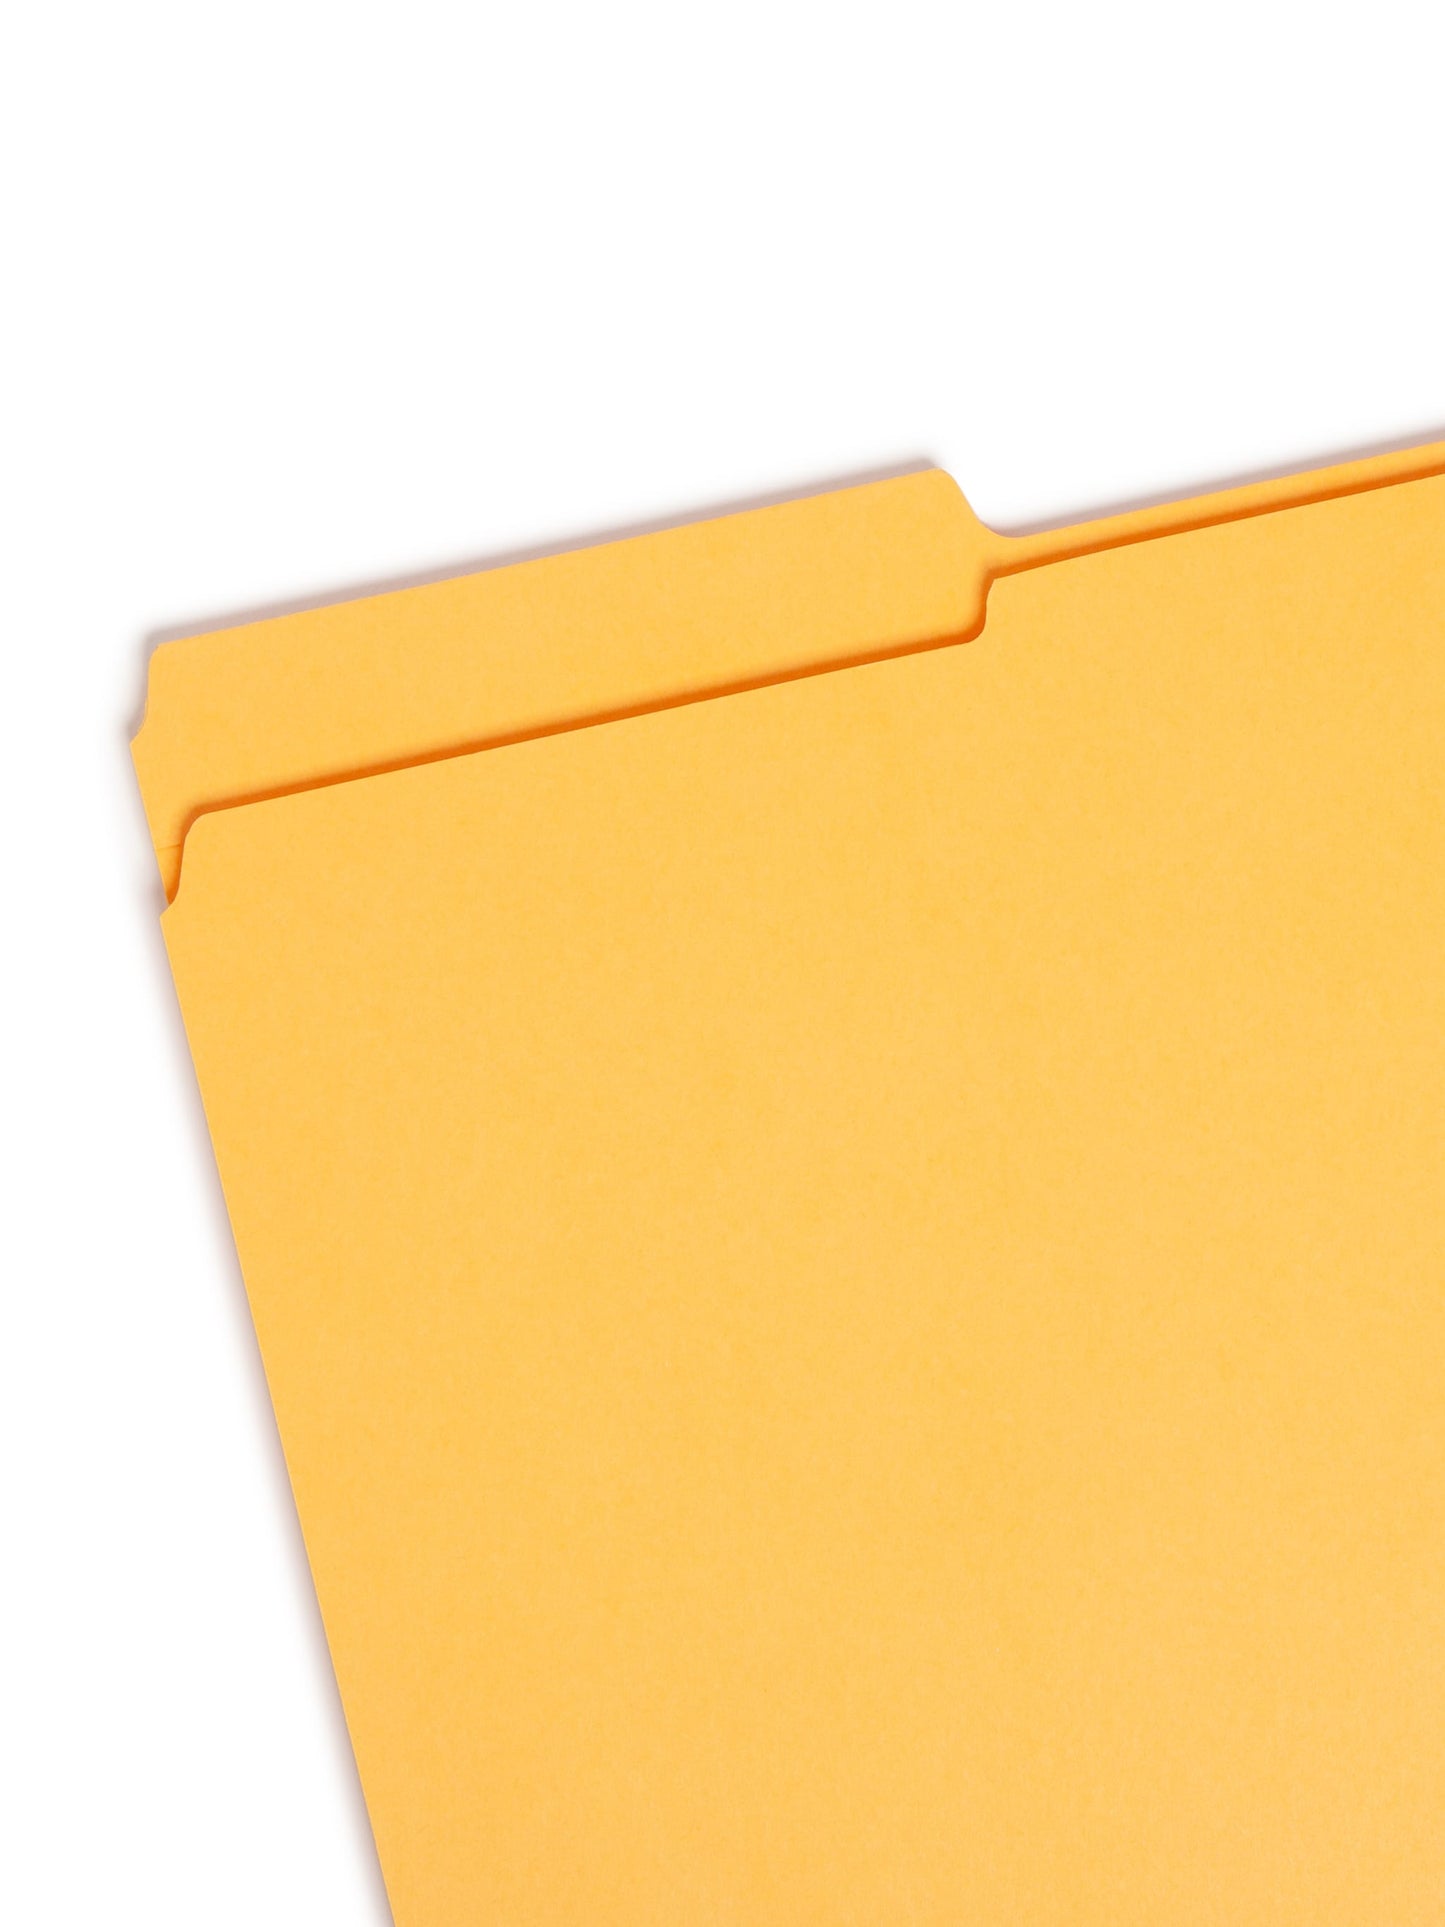 Reinforced Tab File Folders, 1/3-Cut Tab, Gold Color, Legal Size, Set of 100, 086486172349